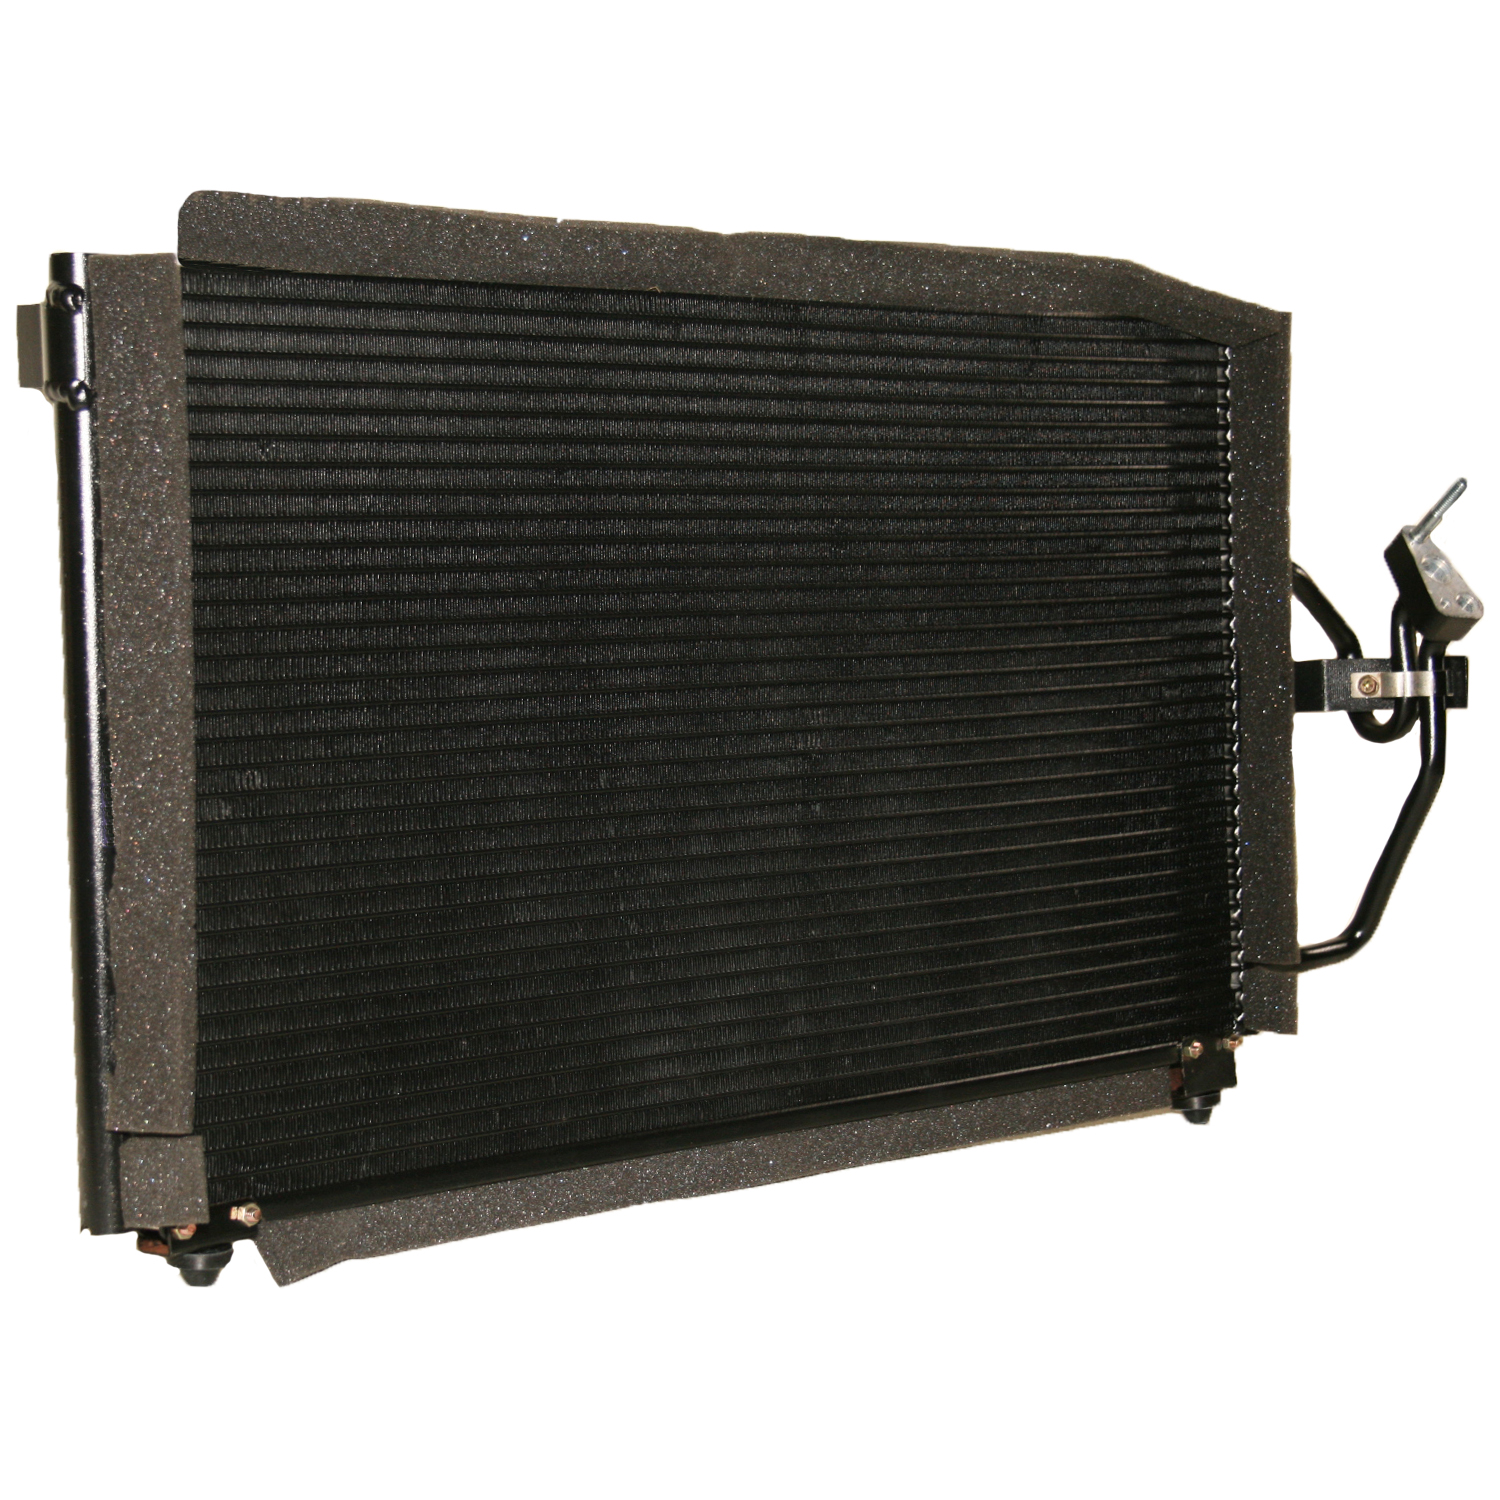 TCW Condenser 44-4965 New Product Image field_60b6a13a6e67c